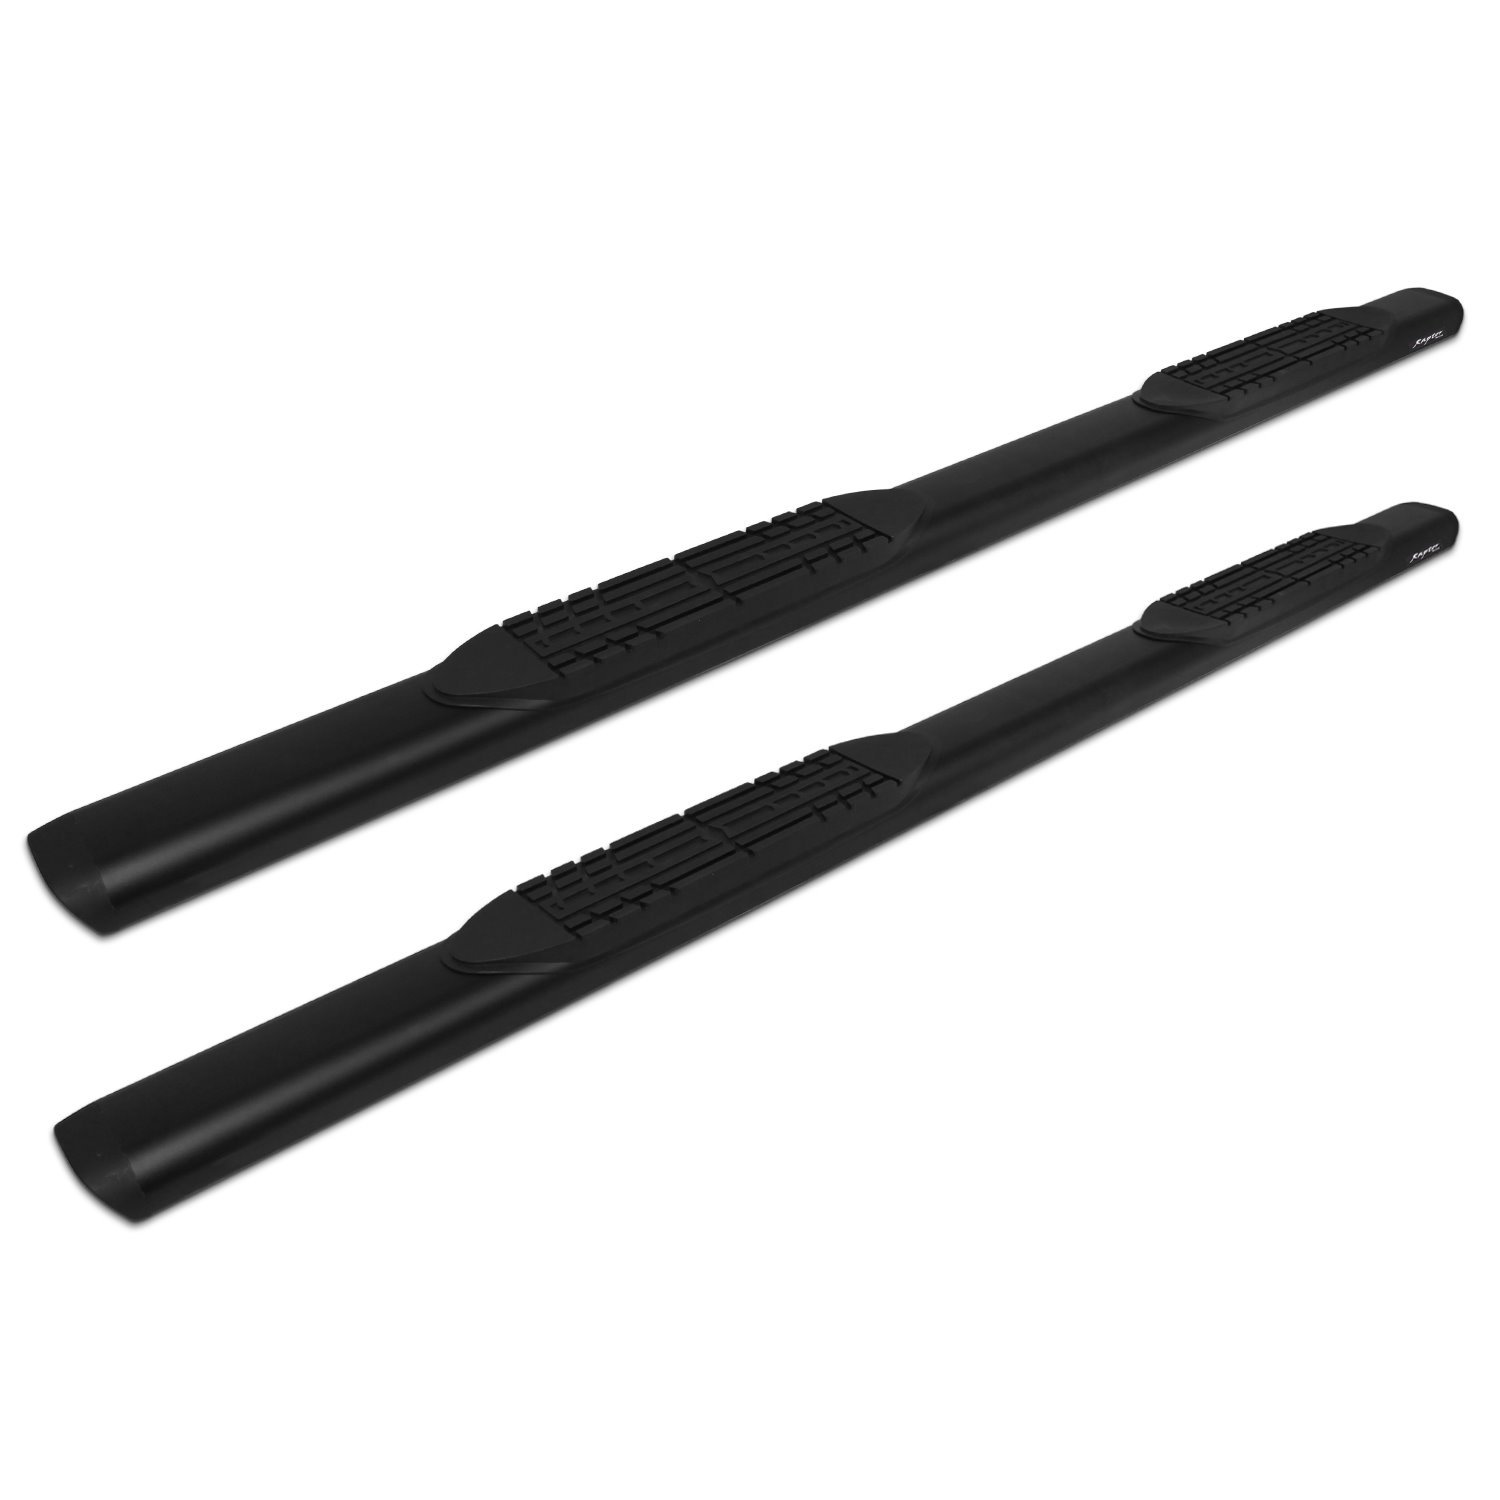 2001-0342BT 5 in Oval Style Slide Track Running Boards, Black Aluminum, Fits Select Chevy Colorado/GMC Canyon